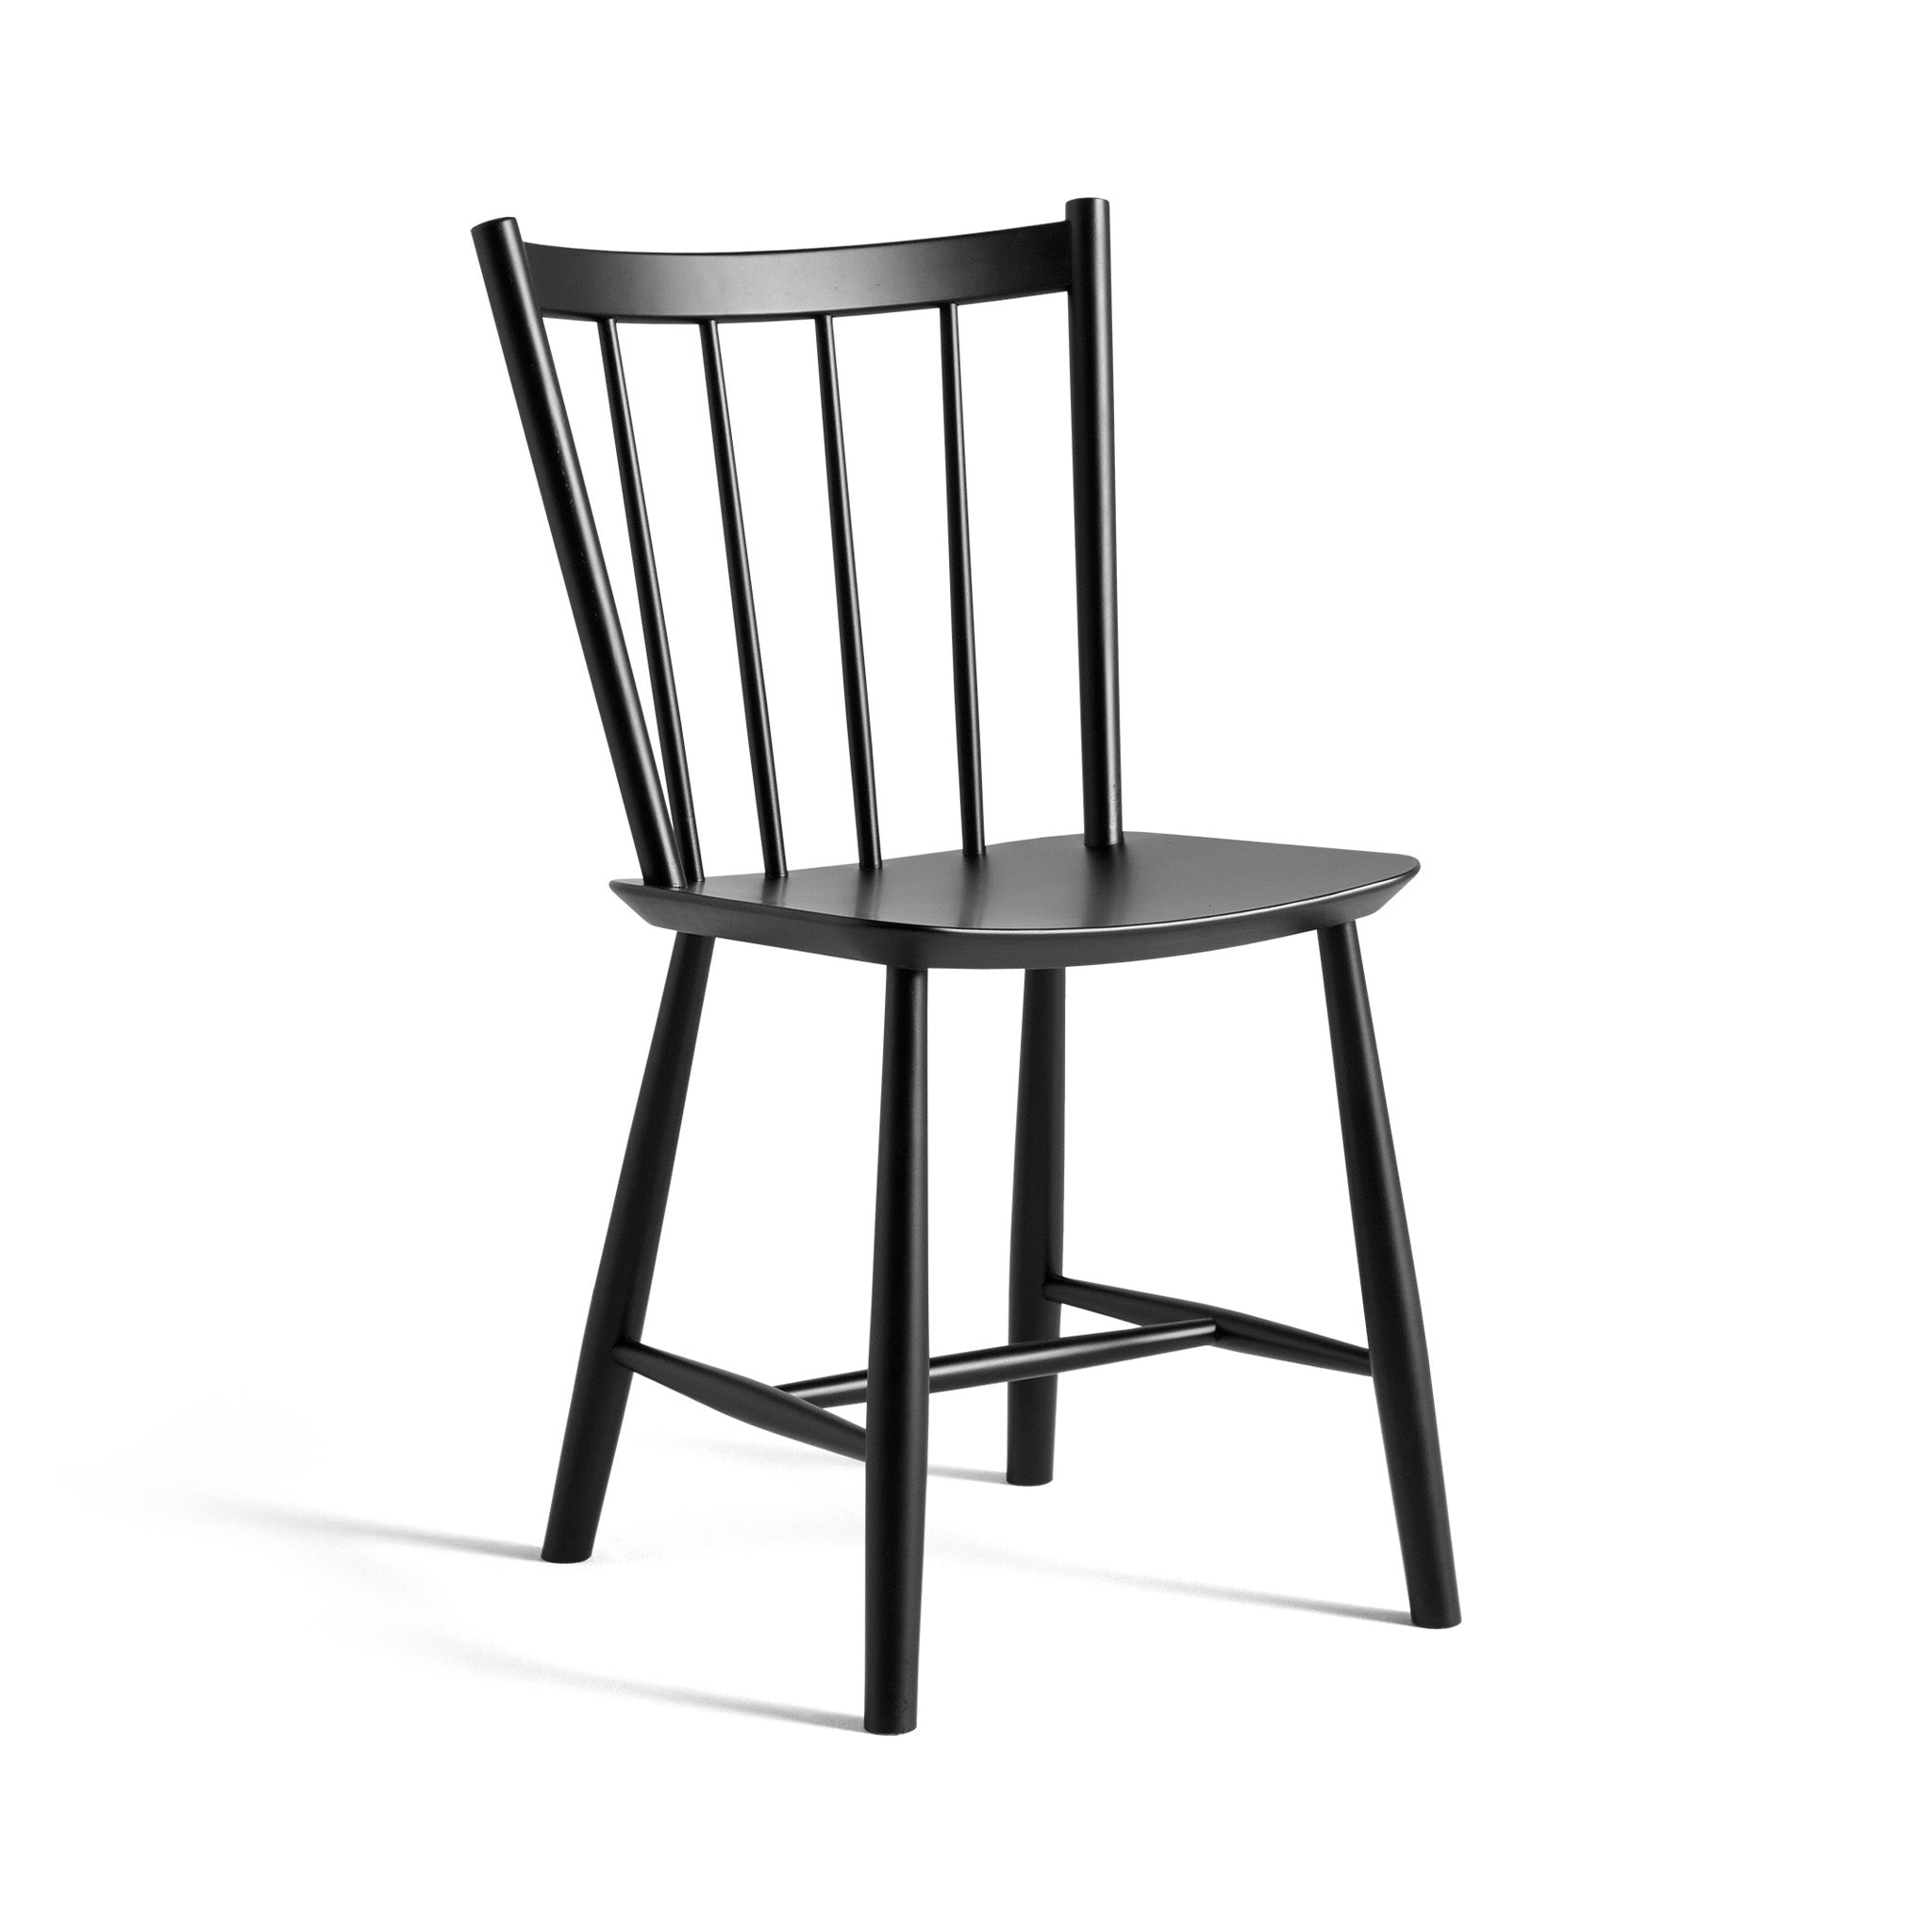 J41 Chair By Børge Mogensen For Hay